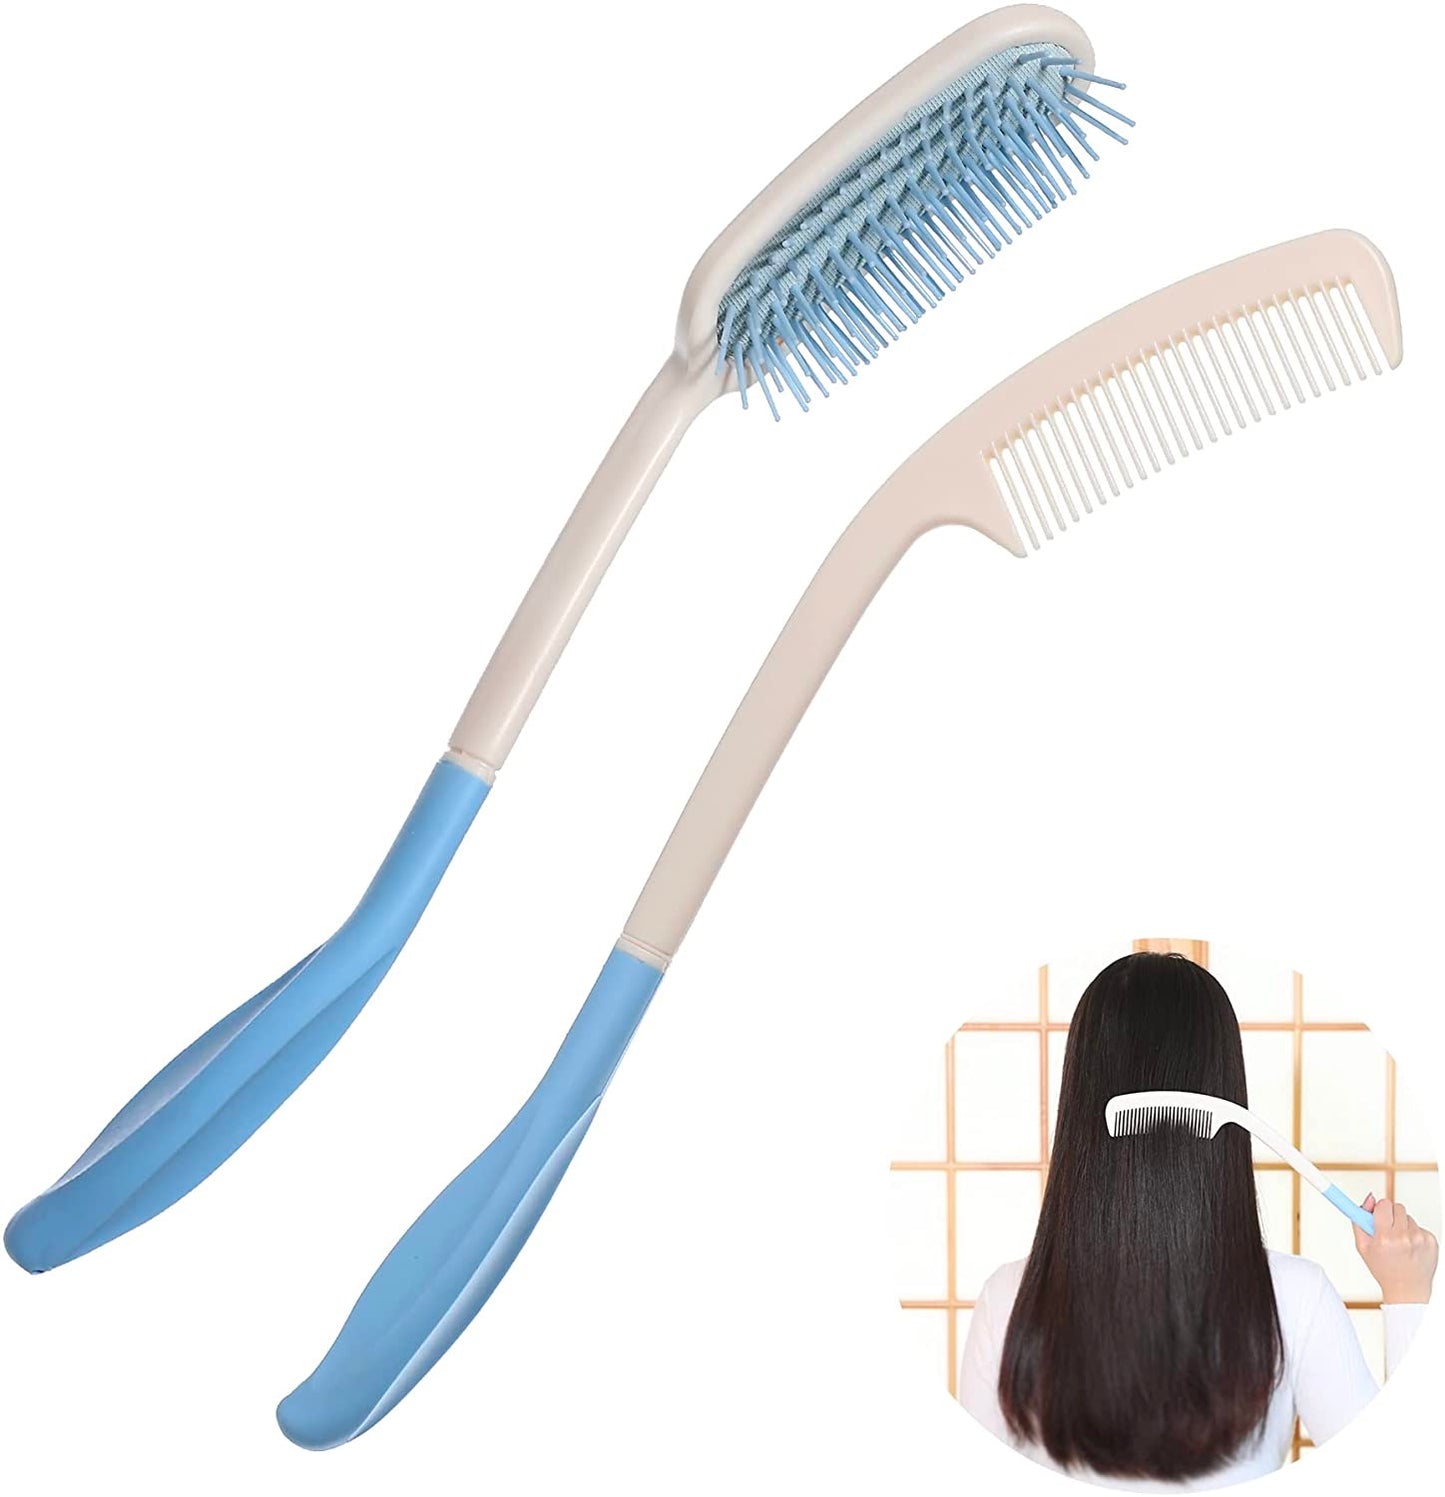 long handle comb and brush